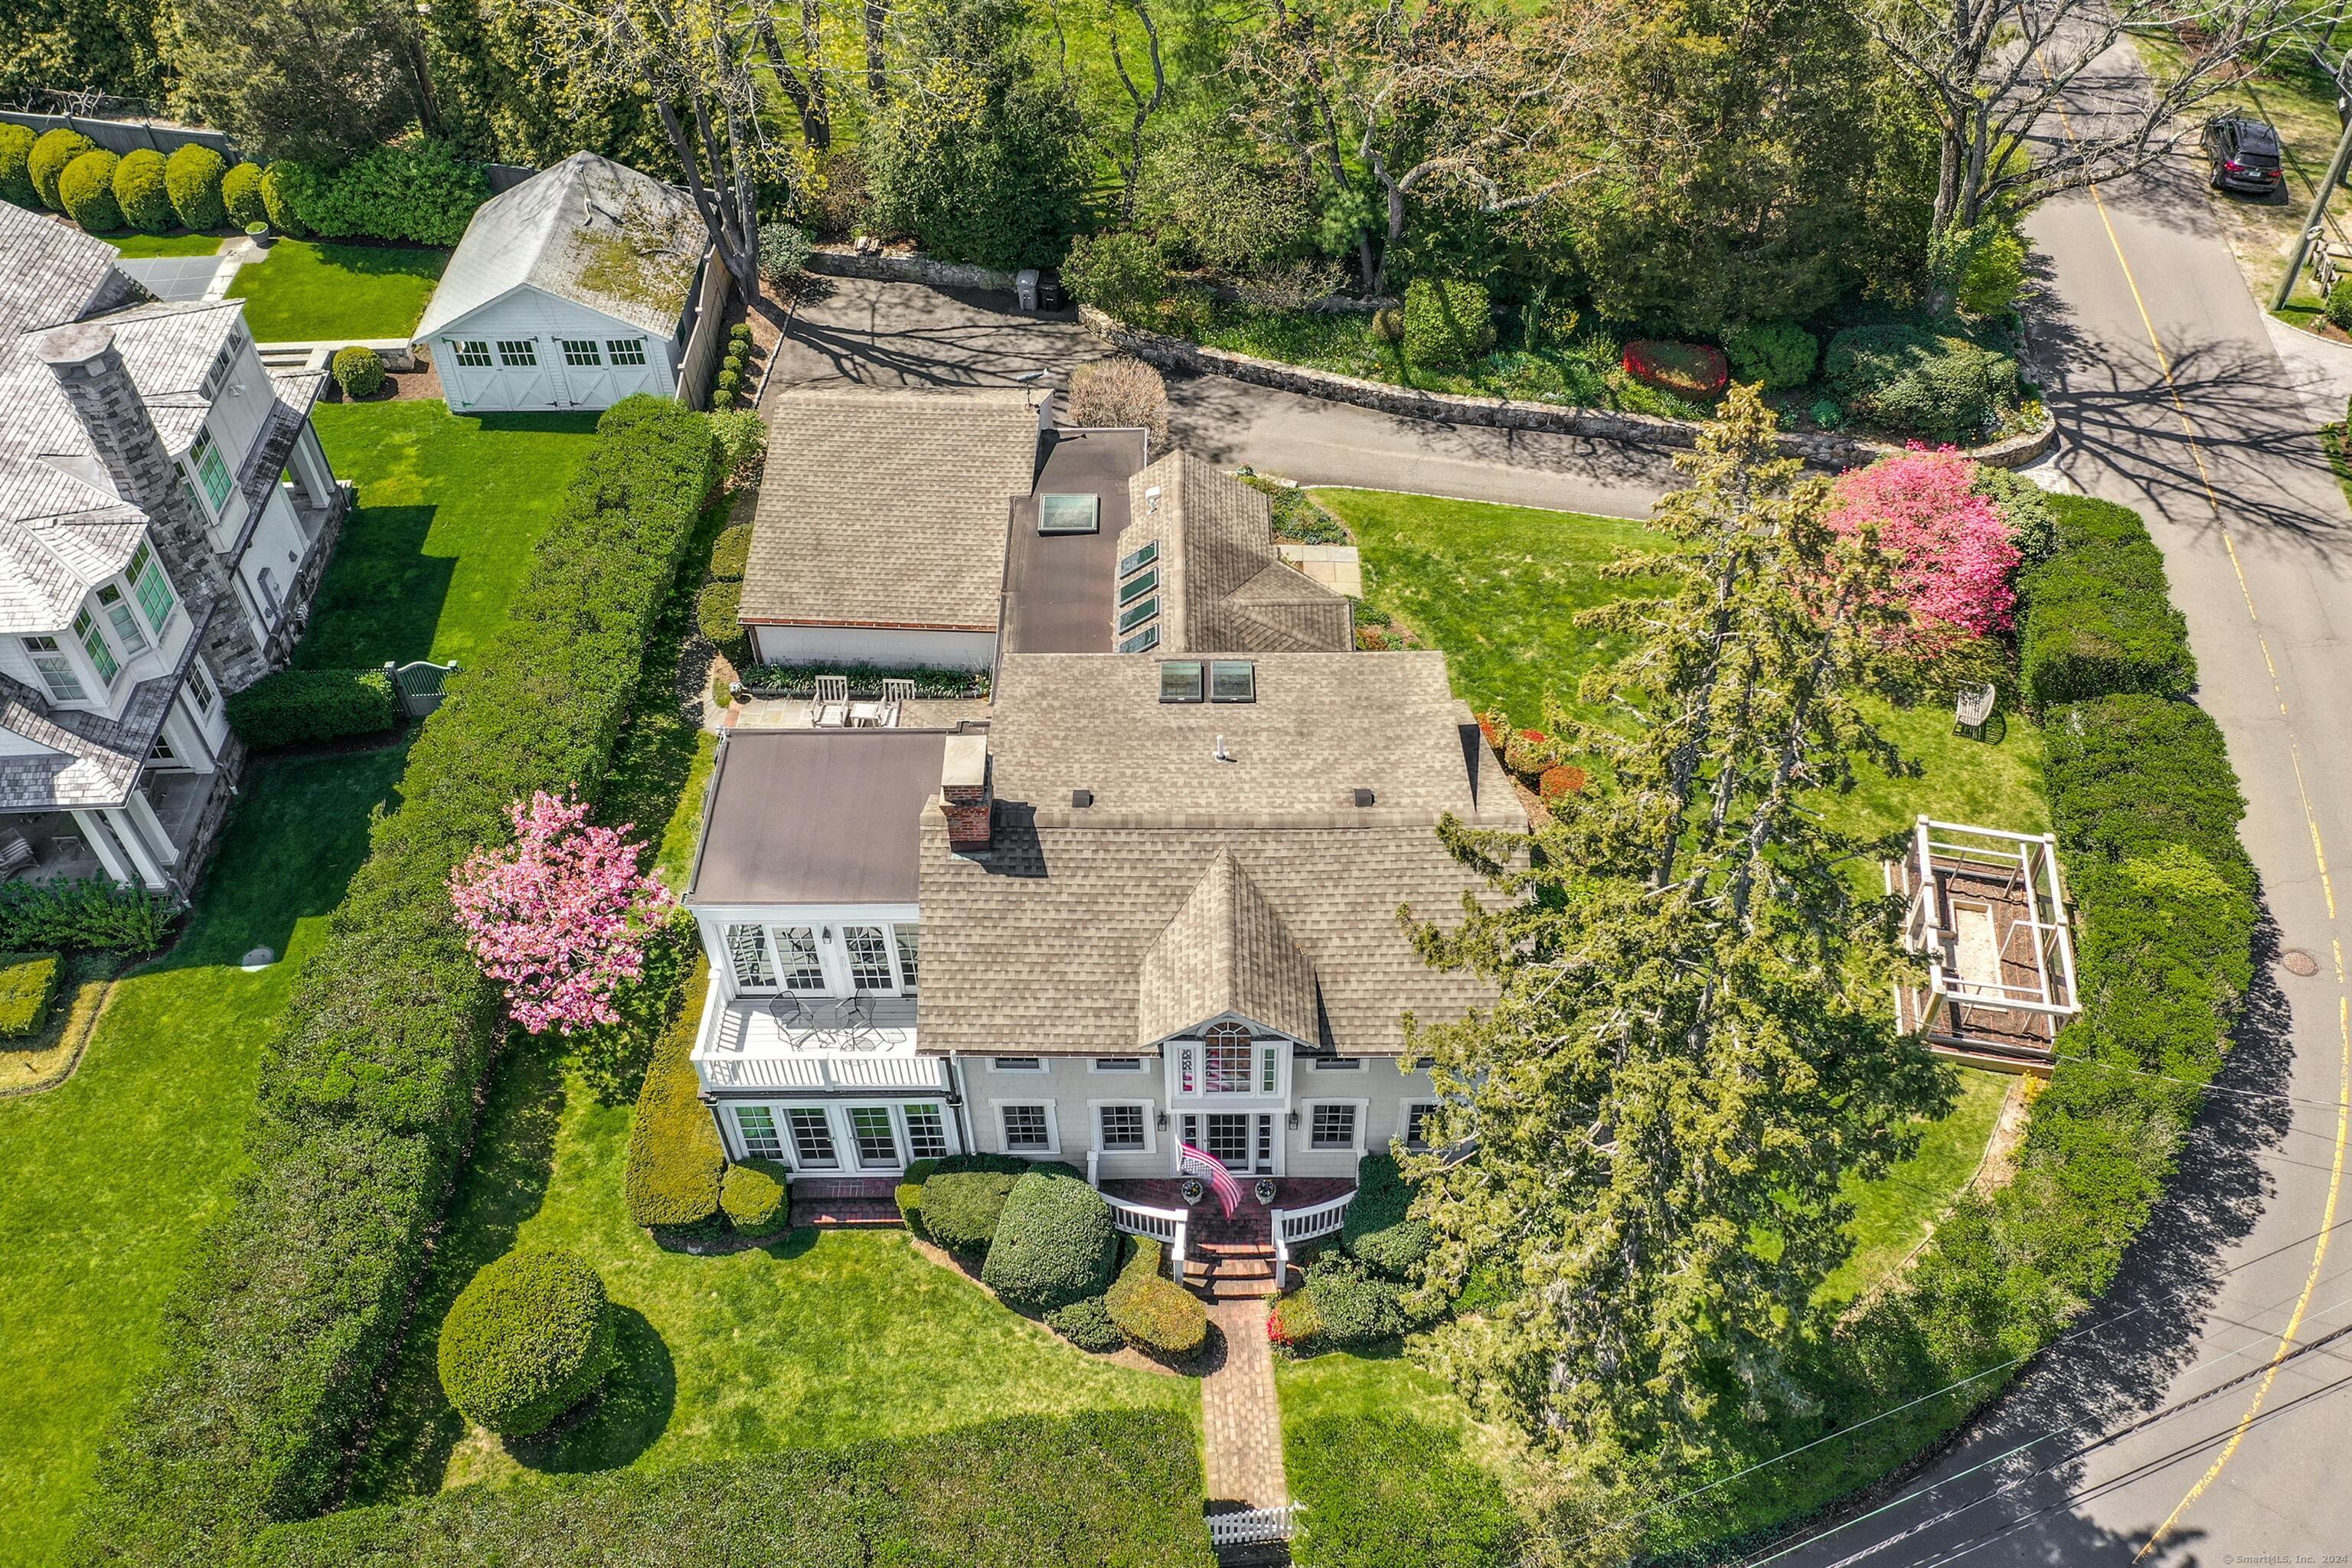 Property for Sale at 64 5 Mile River Road, Darien, Connecticut - Bedrooms: 4 
Bathrooms: 3 
Rooms: 9  - $2,395,000